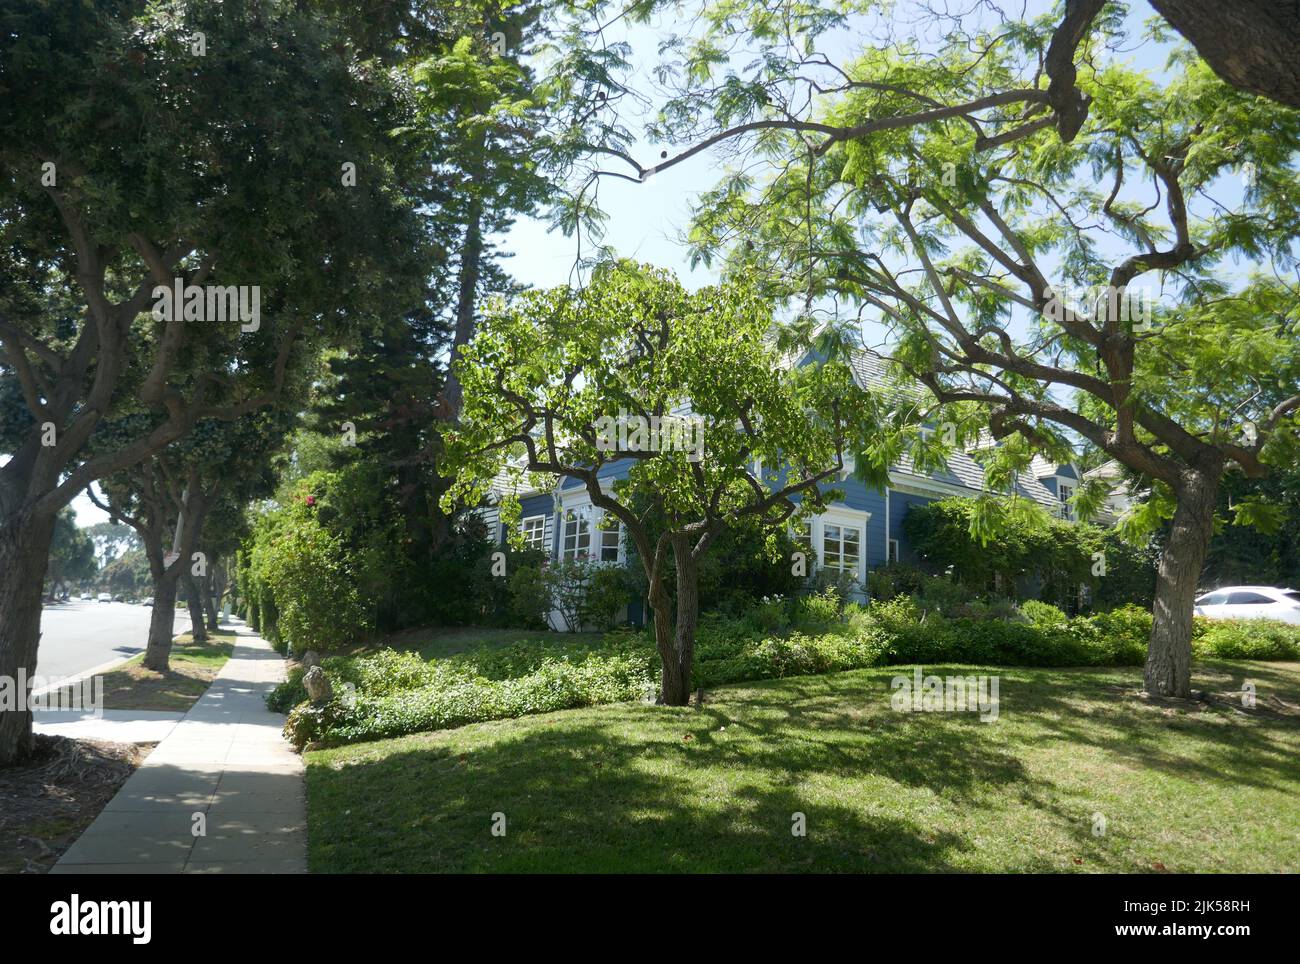 Beverly Hills, California, USA 24th July 2022 Actress Shirley Jones, comedian Marty Ingels, Ryan Cassidy, Singer Shaun Cassidy Ann Pennington's Former Home/house at 701 N. Oakhurst Drive on July 24, 2022 in Beverly Hills, California, USA. Photo by Barry King/Alamy Stock Photo Stock Photo